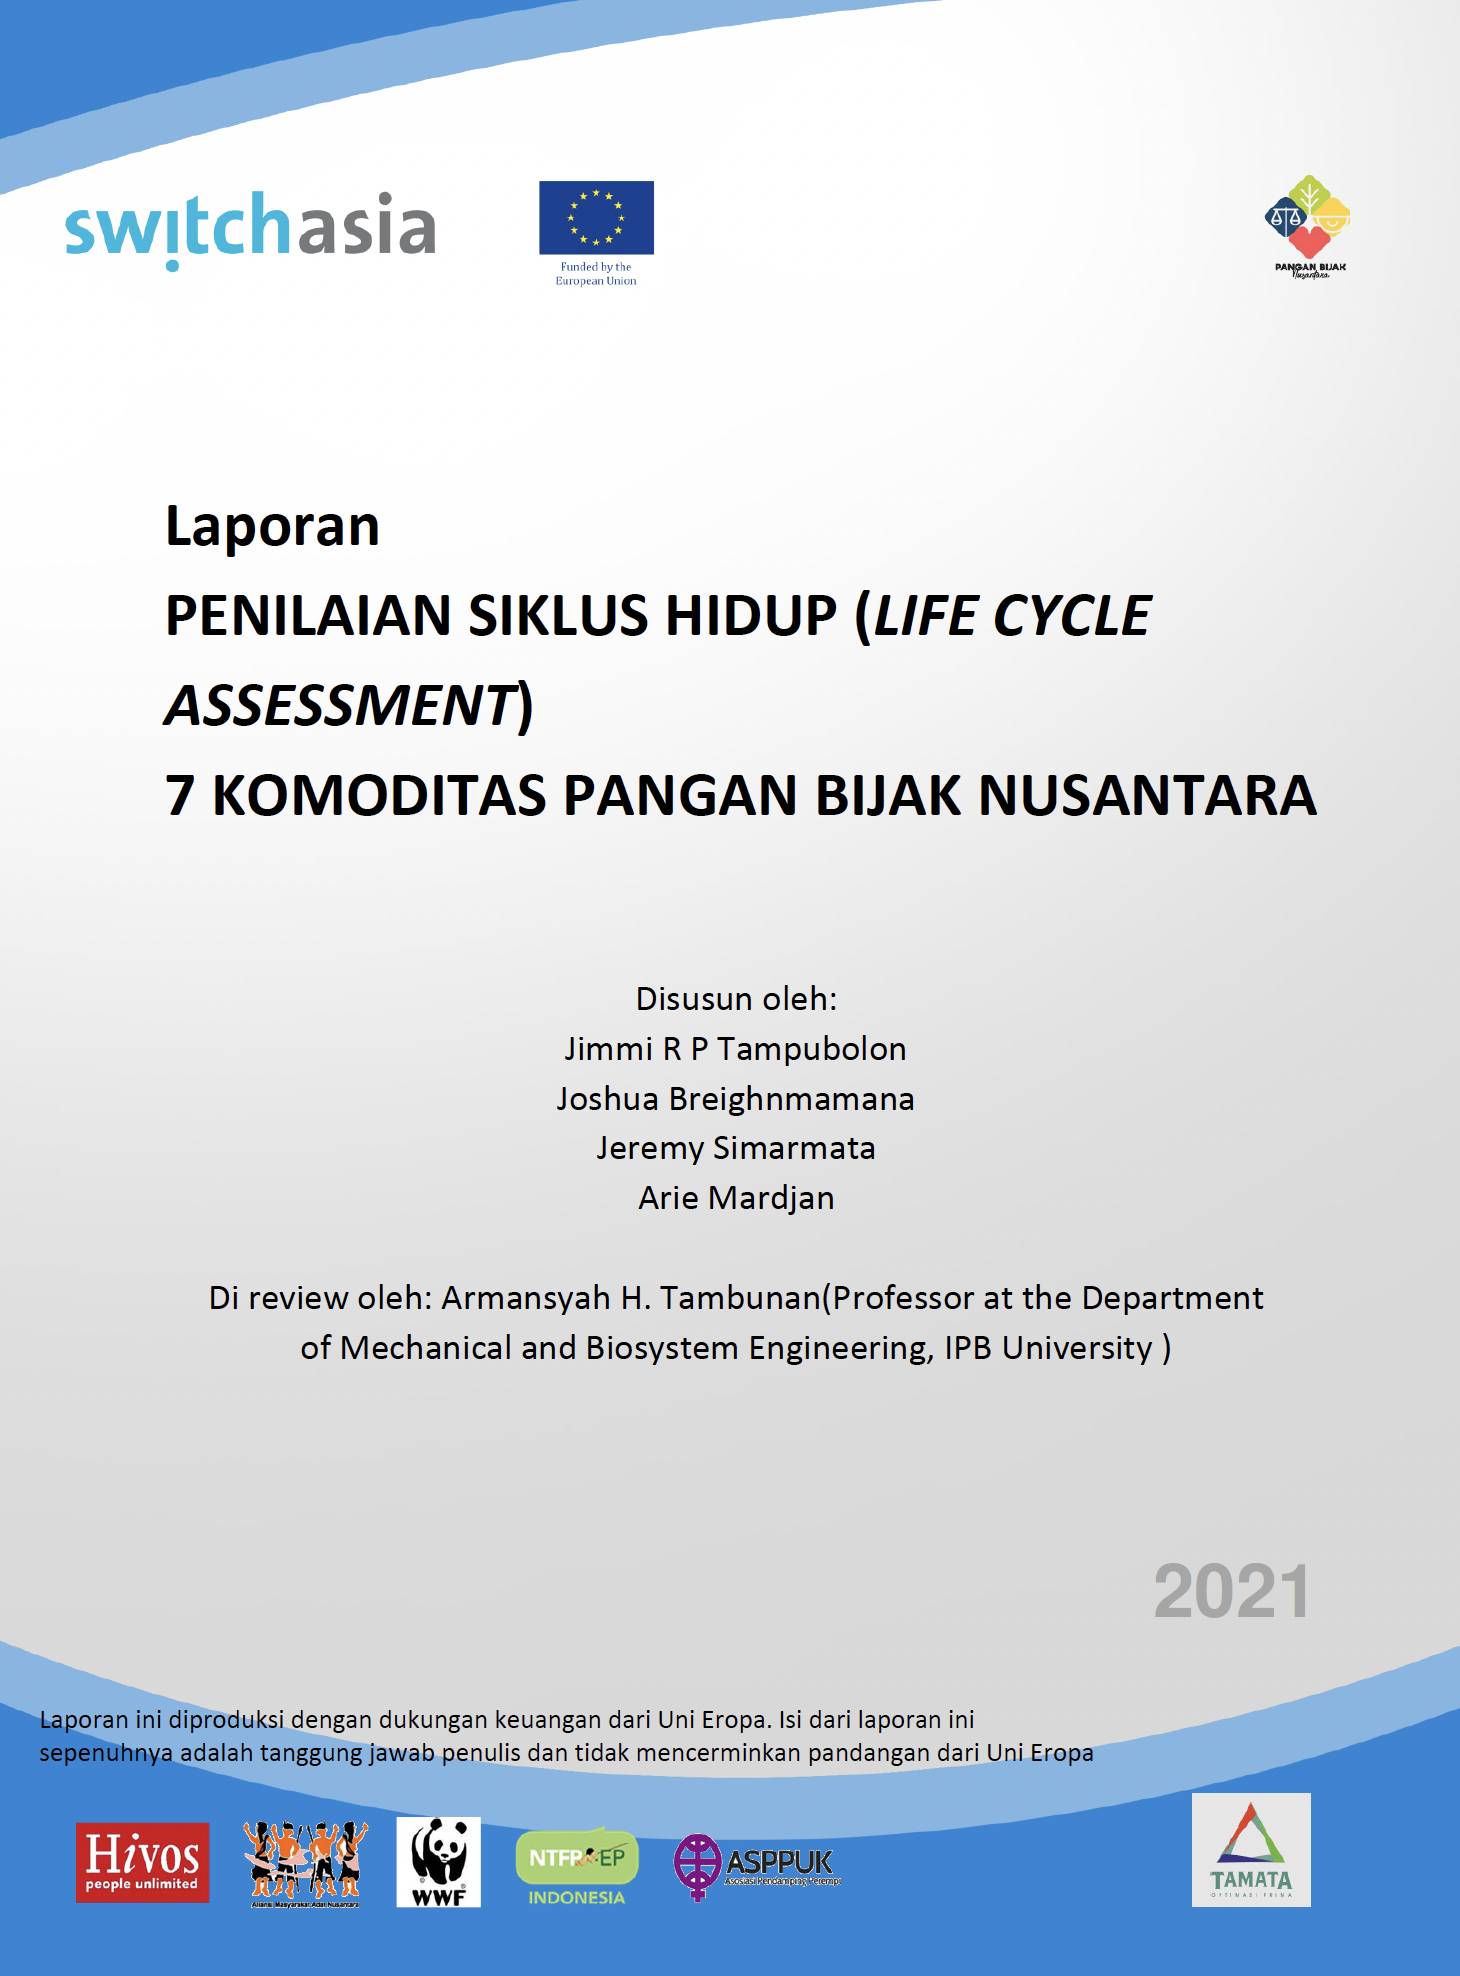 Life Cycle Assessment (2021)